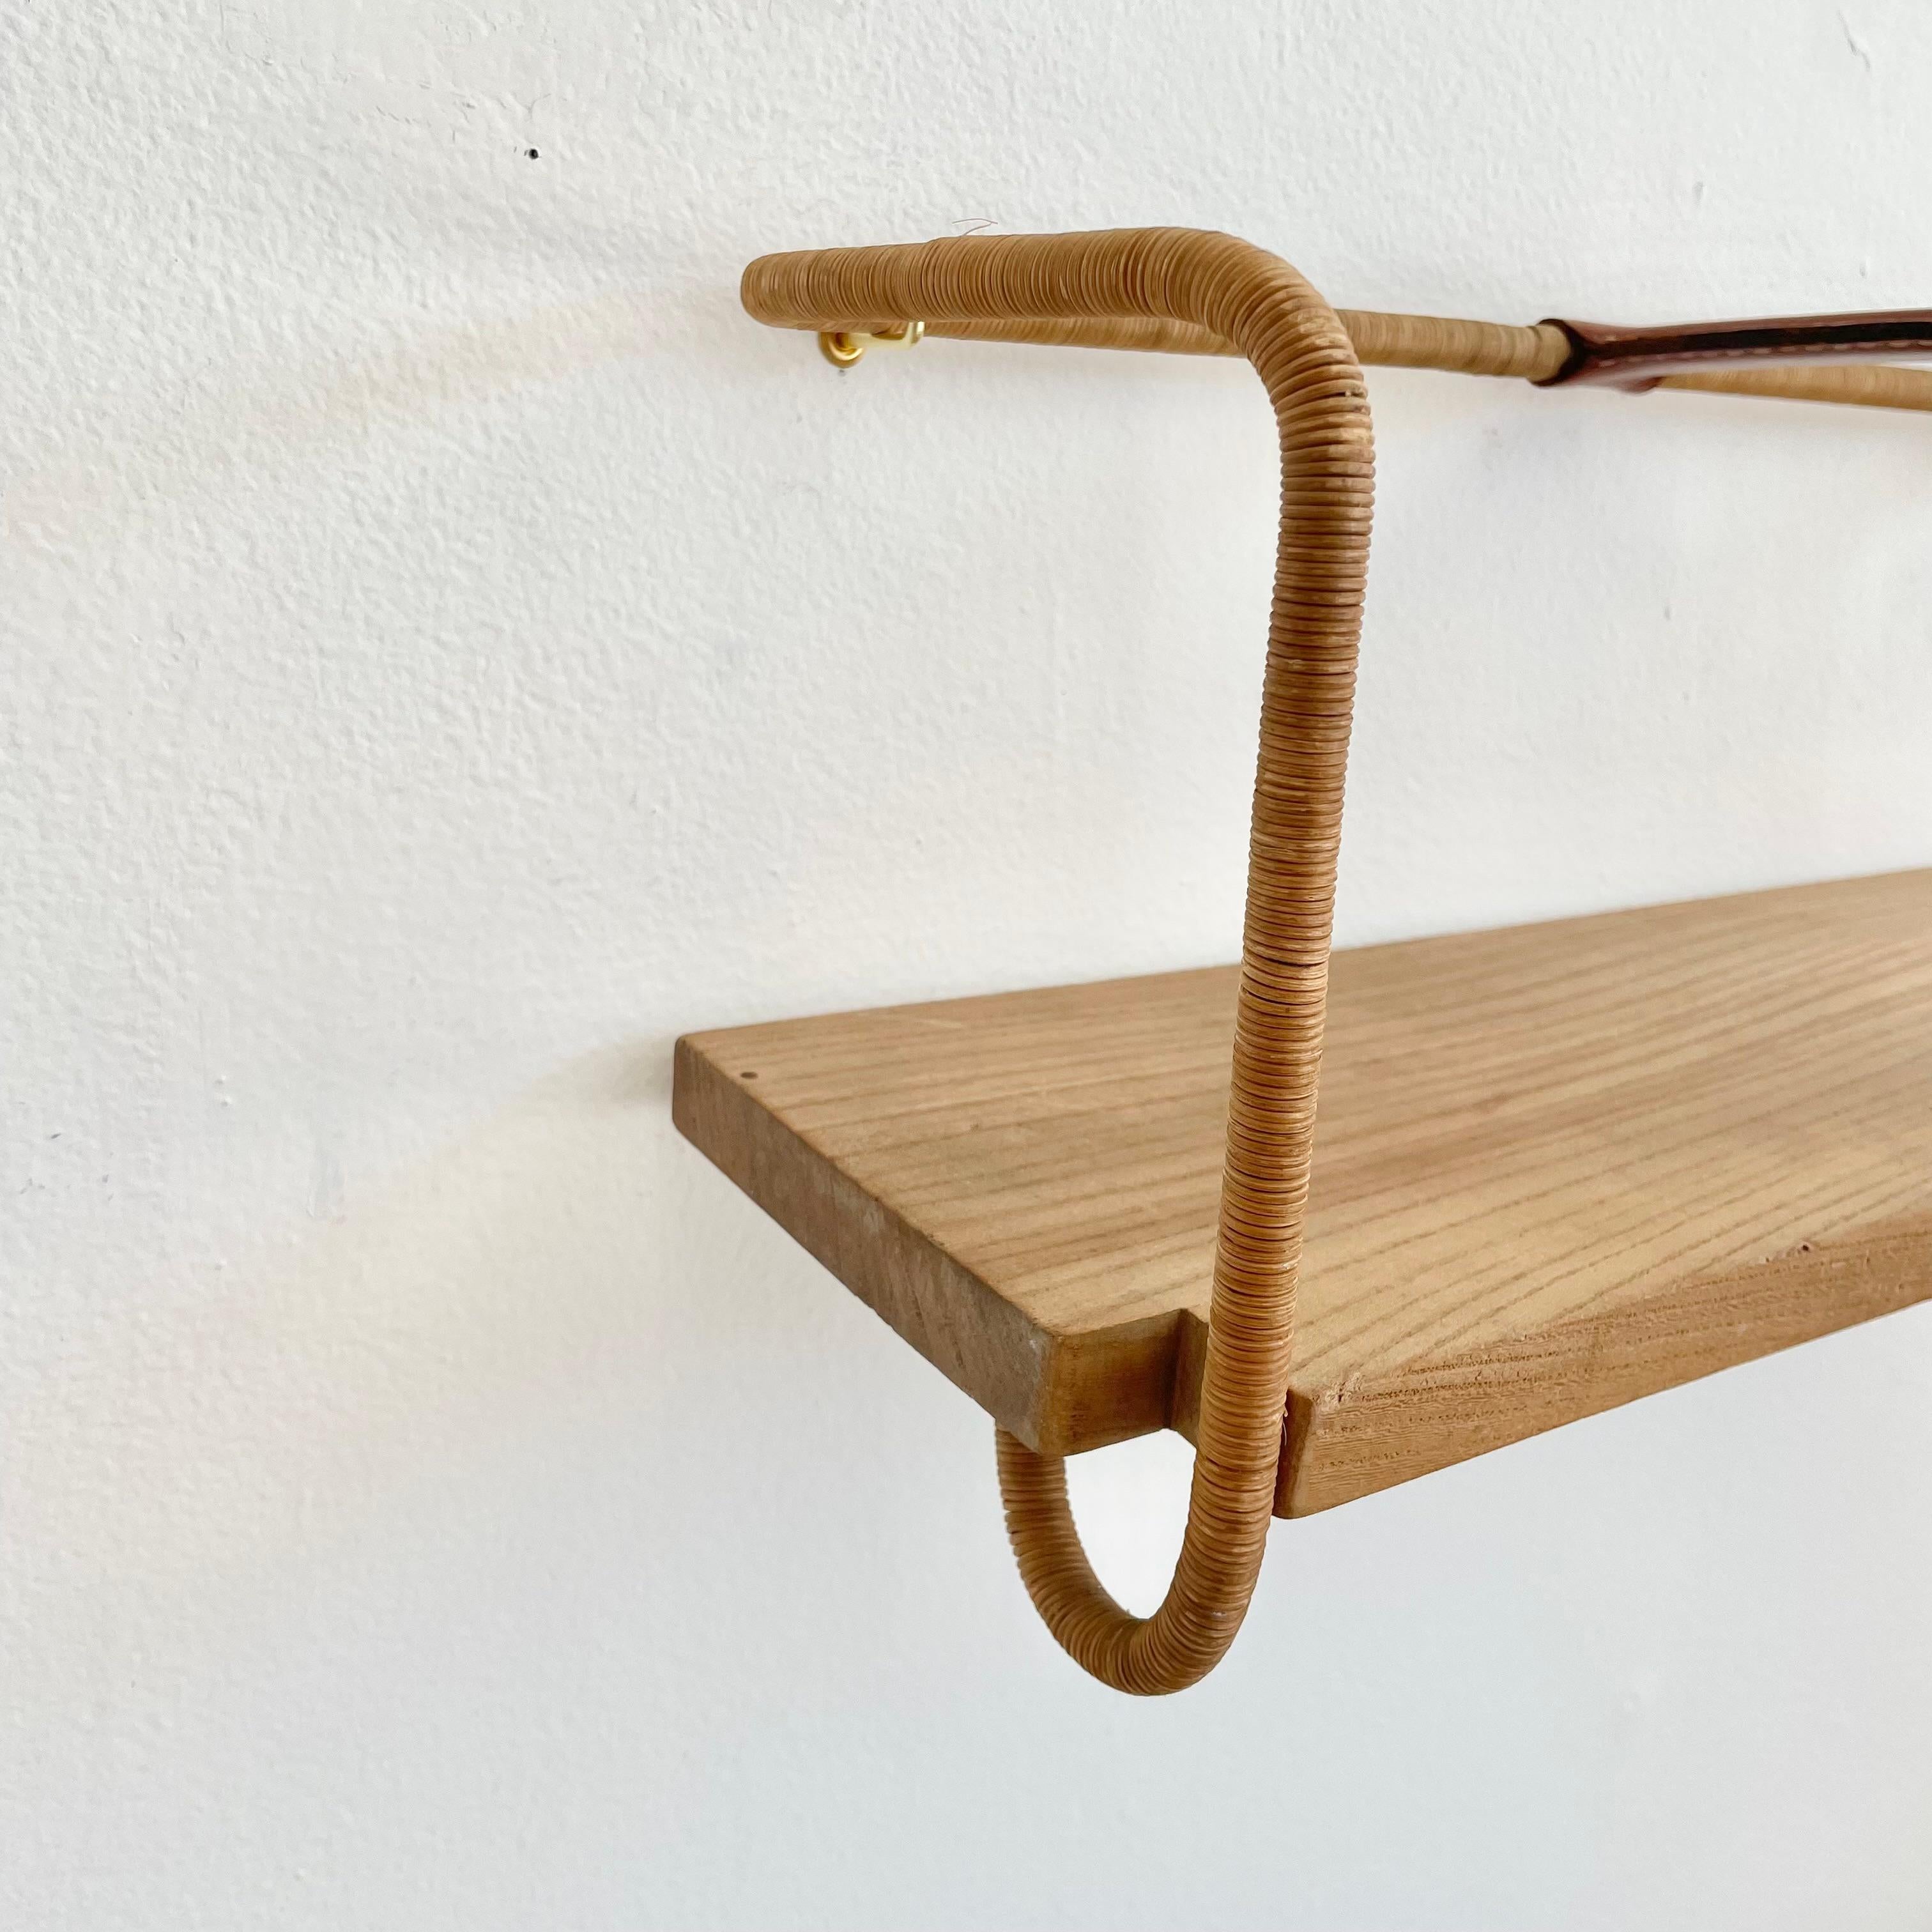 Mid-20th Century Jacques Adnet Leather, Wood and Twine Shelf, 1950s France For Sale